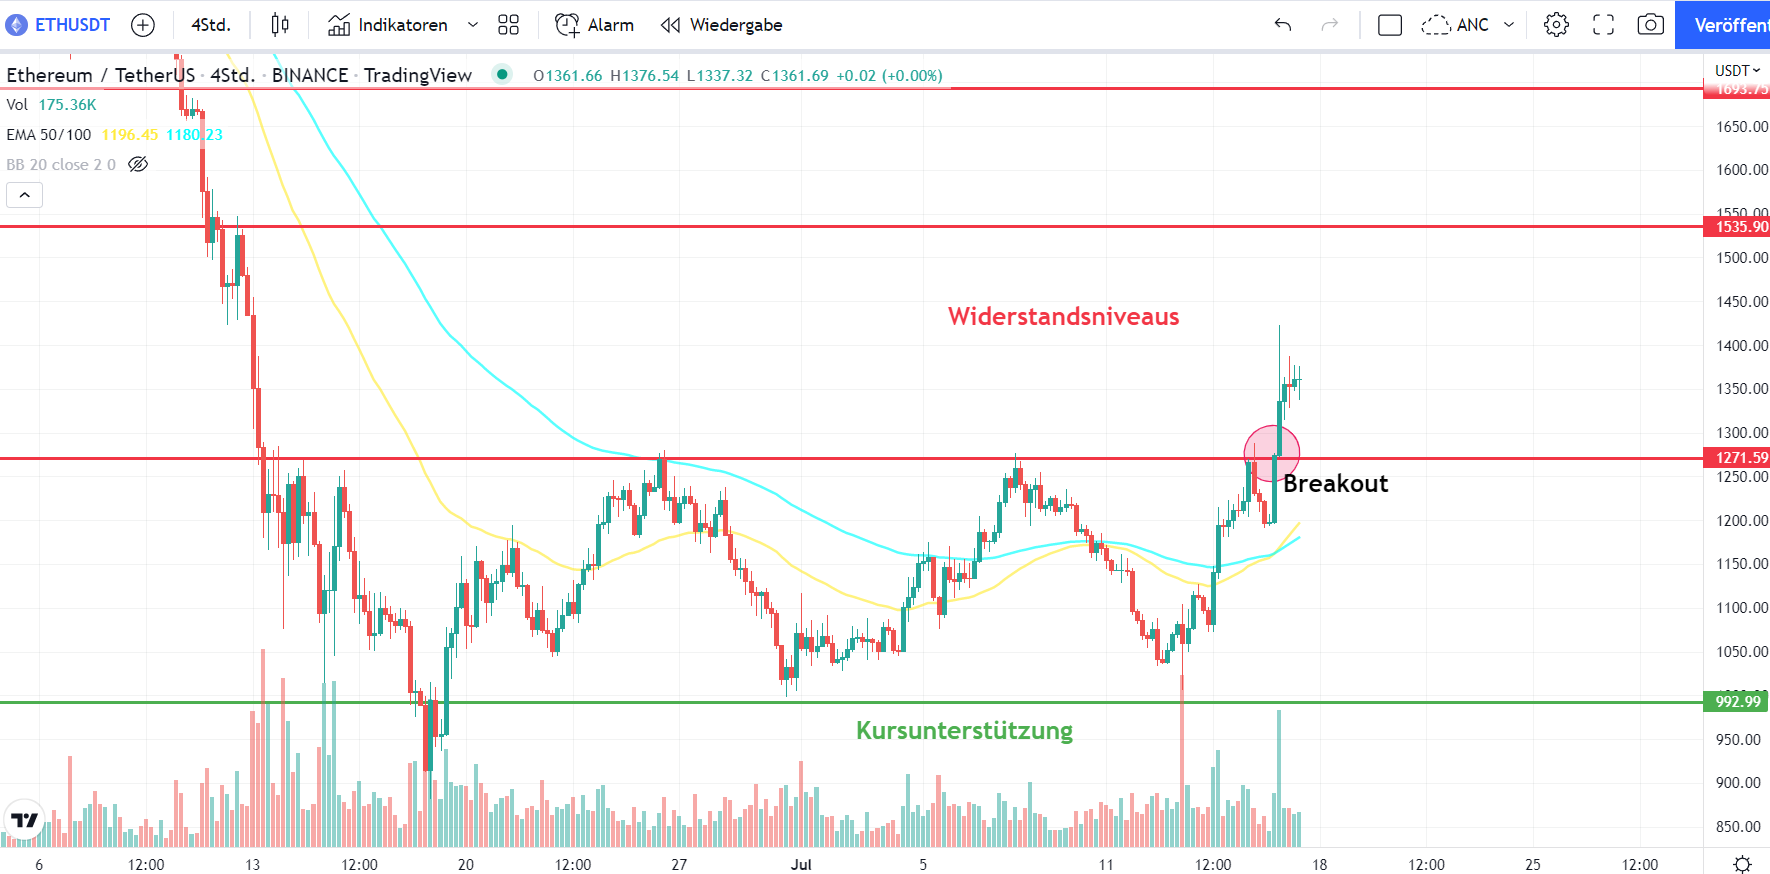 Price of the cryptocurrency Ethereum (ETH) on the 4-hour chart, Tradingview